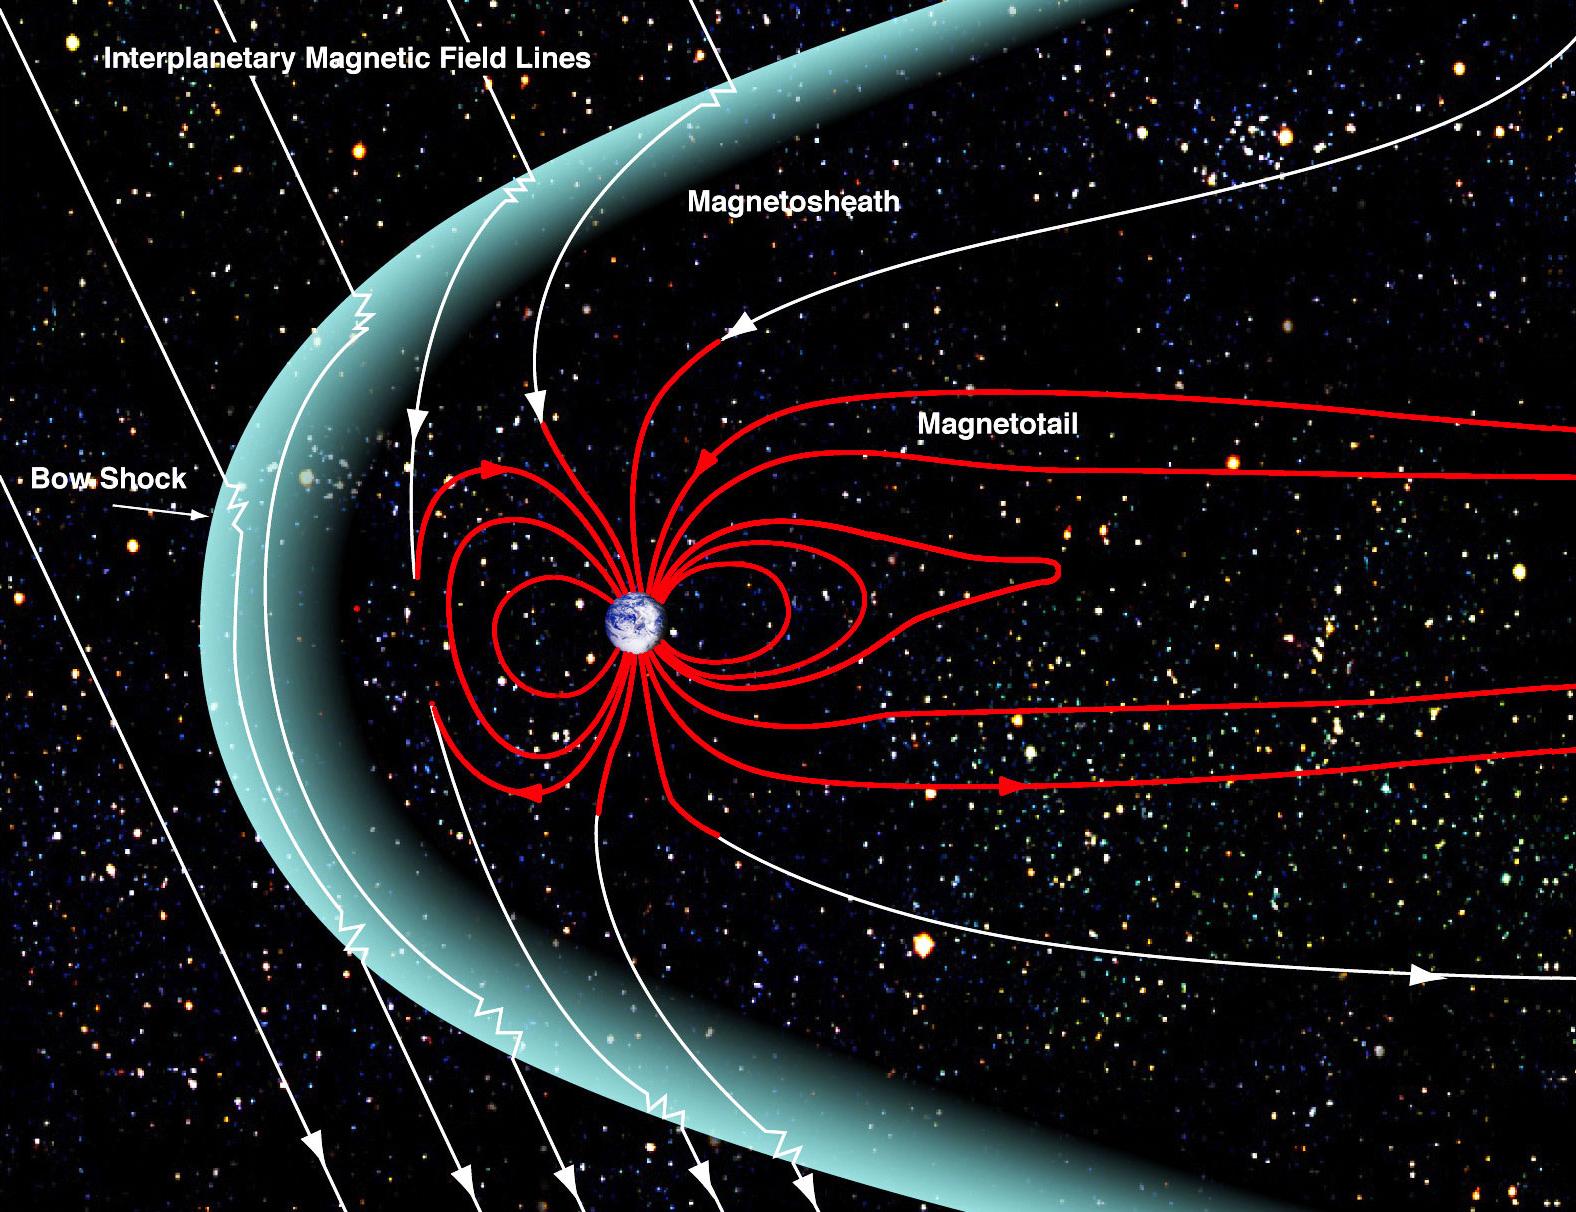 The shape of the Earth's magnetosphere (that area of space controlled by the planet's magnetic field, which is depicted here in red lines) is the direct result of being blasted by solar wind. The Earth's magnetosphere is a highly dynamic structure that responds dramatically to solar variations. The proposed mission, STORM, would provide the first global view of interactions between solar wind and the magnetosphere. Image Credit, NASA/Goddard/Aaron Kaase. Click image to download hi-res version.